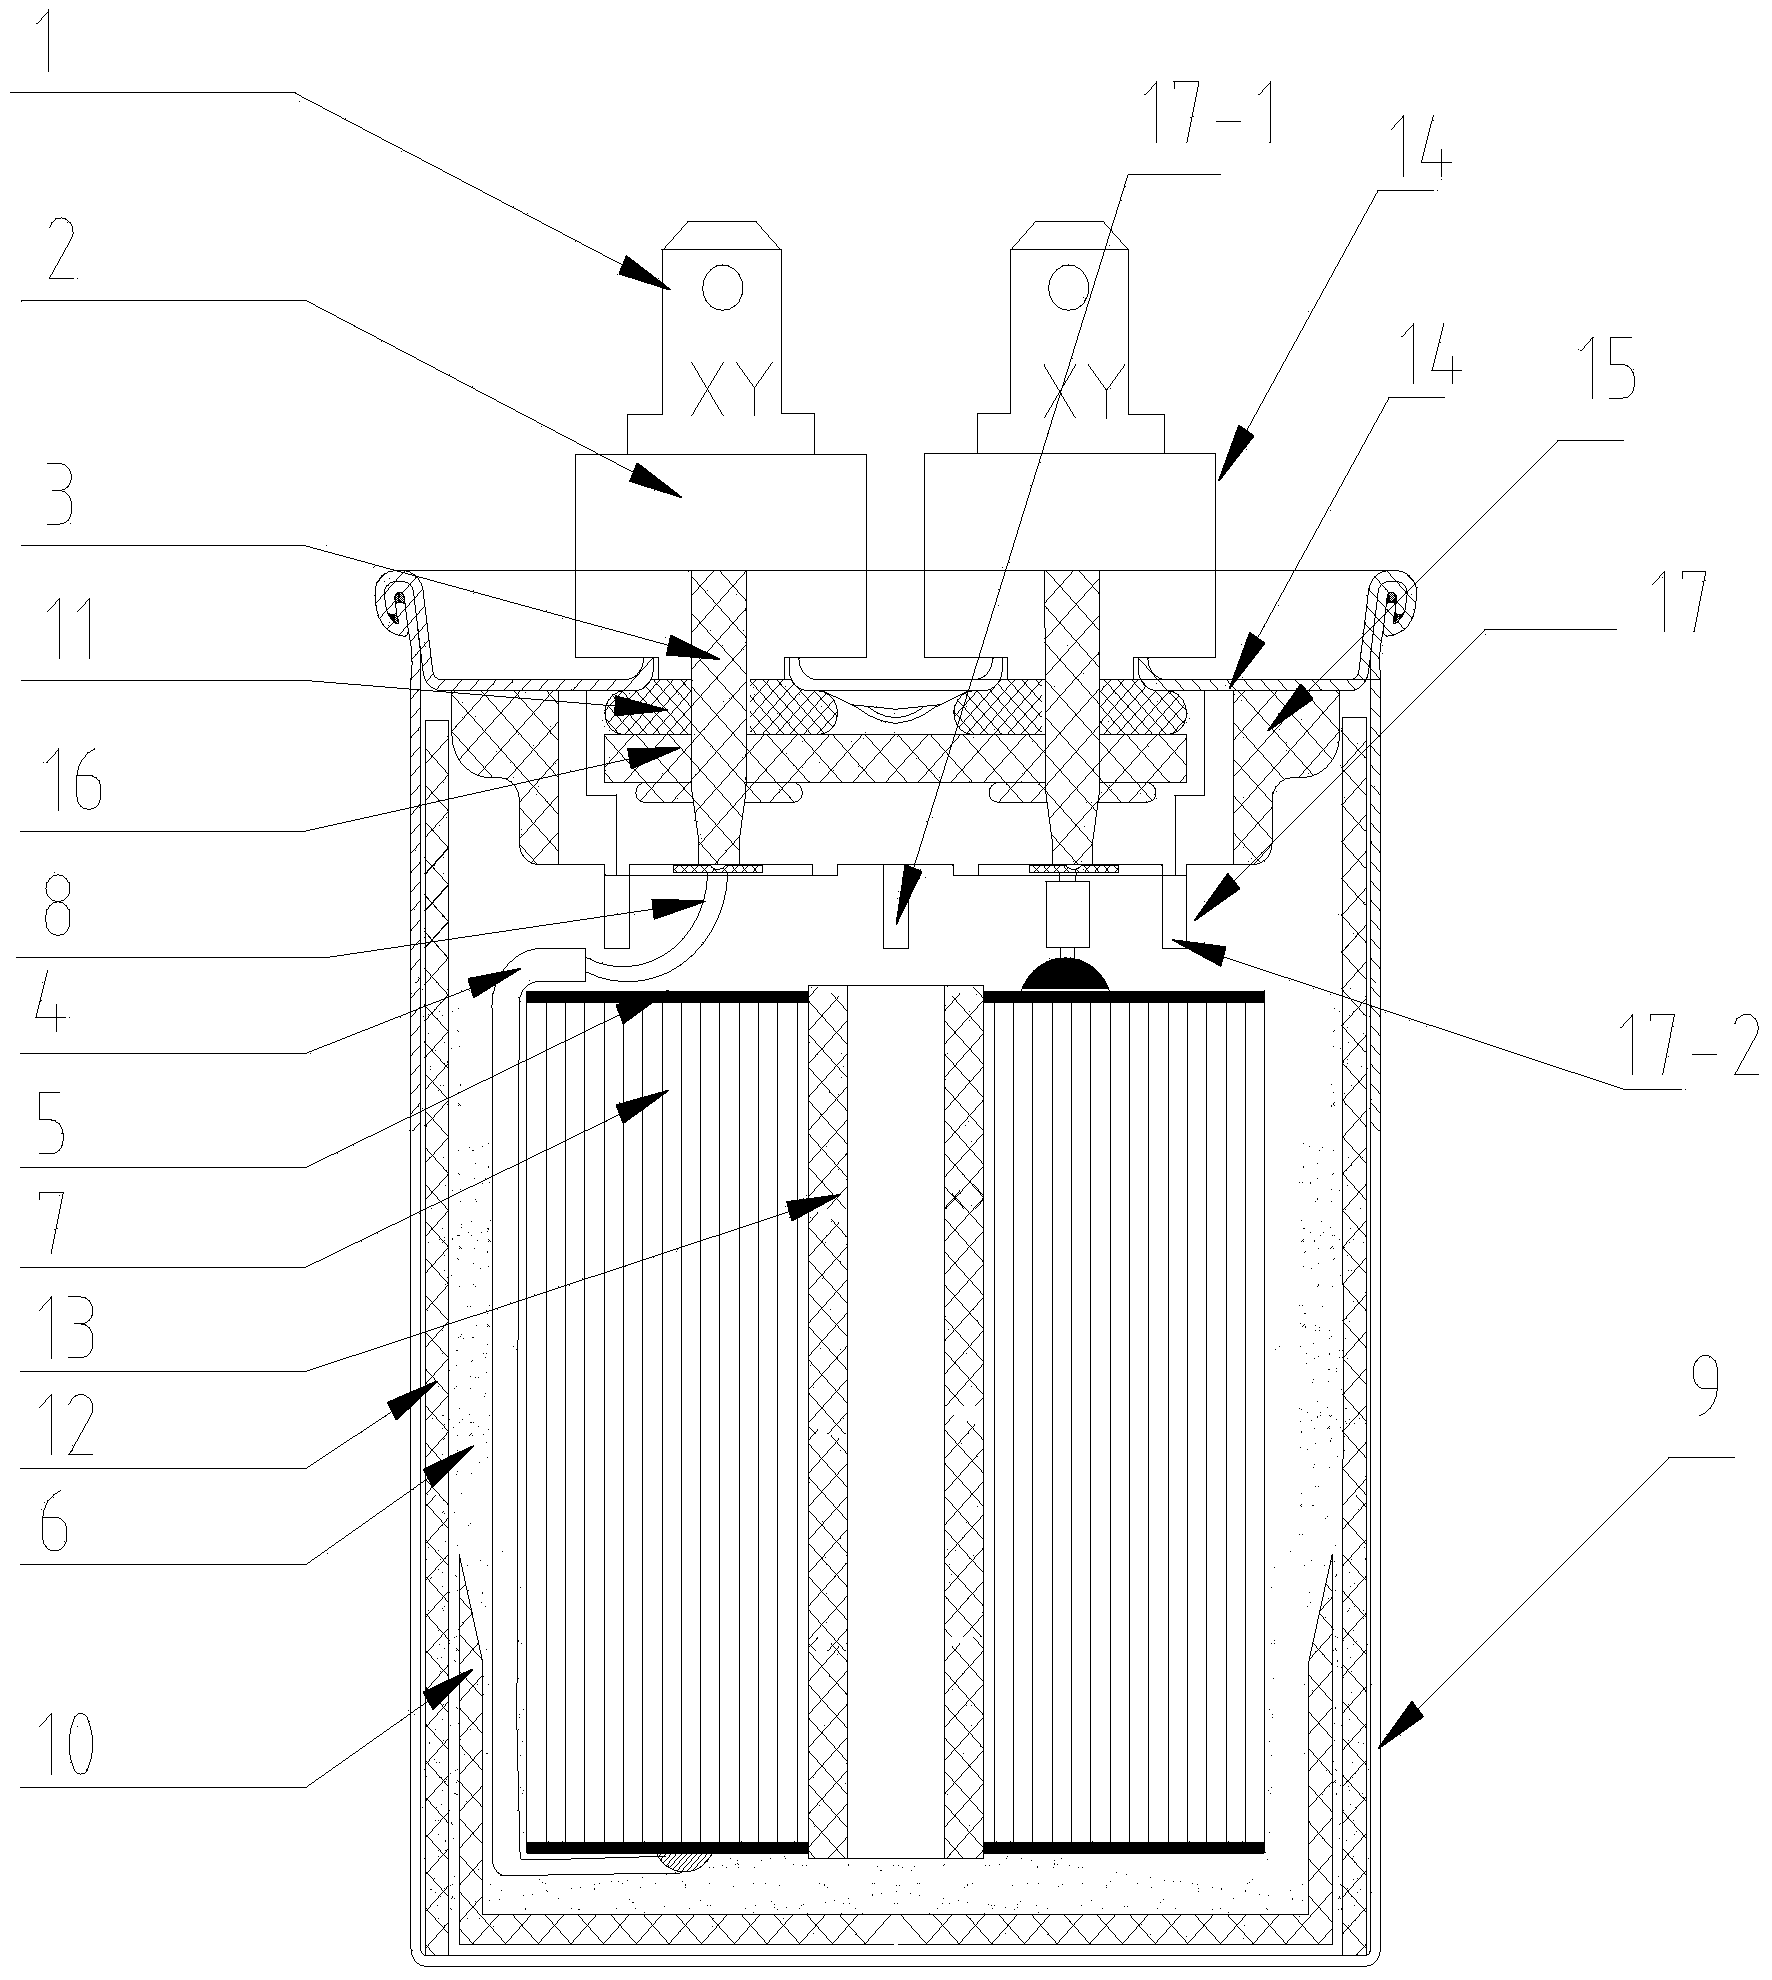 Point-contact-typed explosion-proof capacitor for conductive column